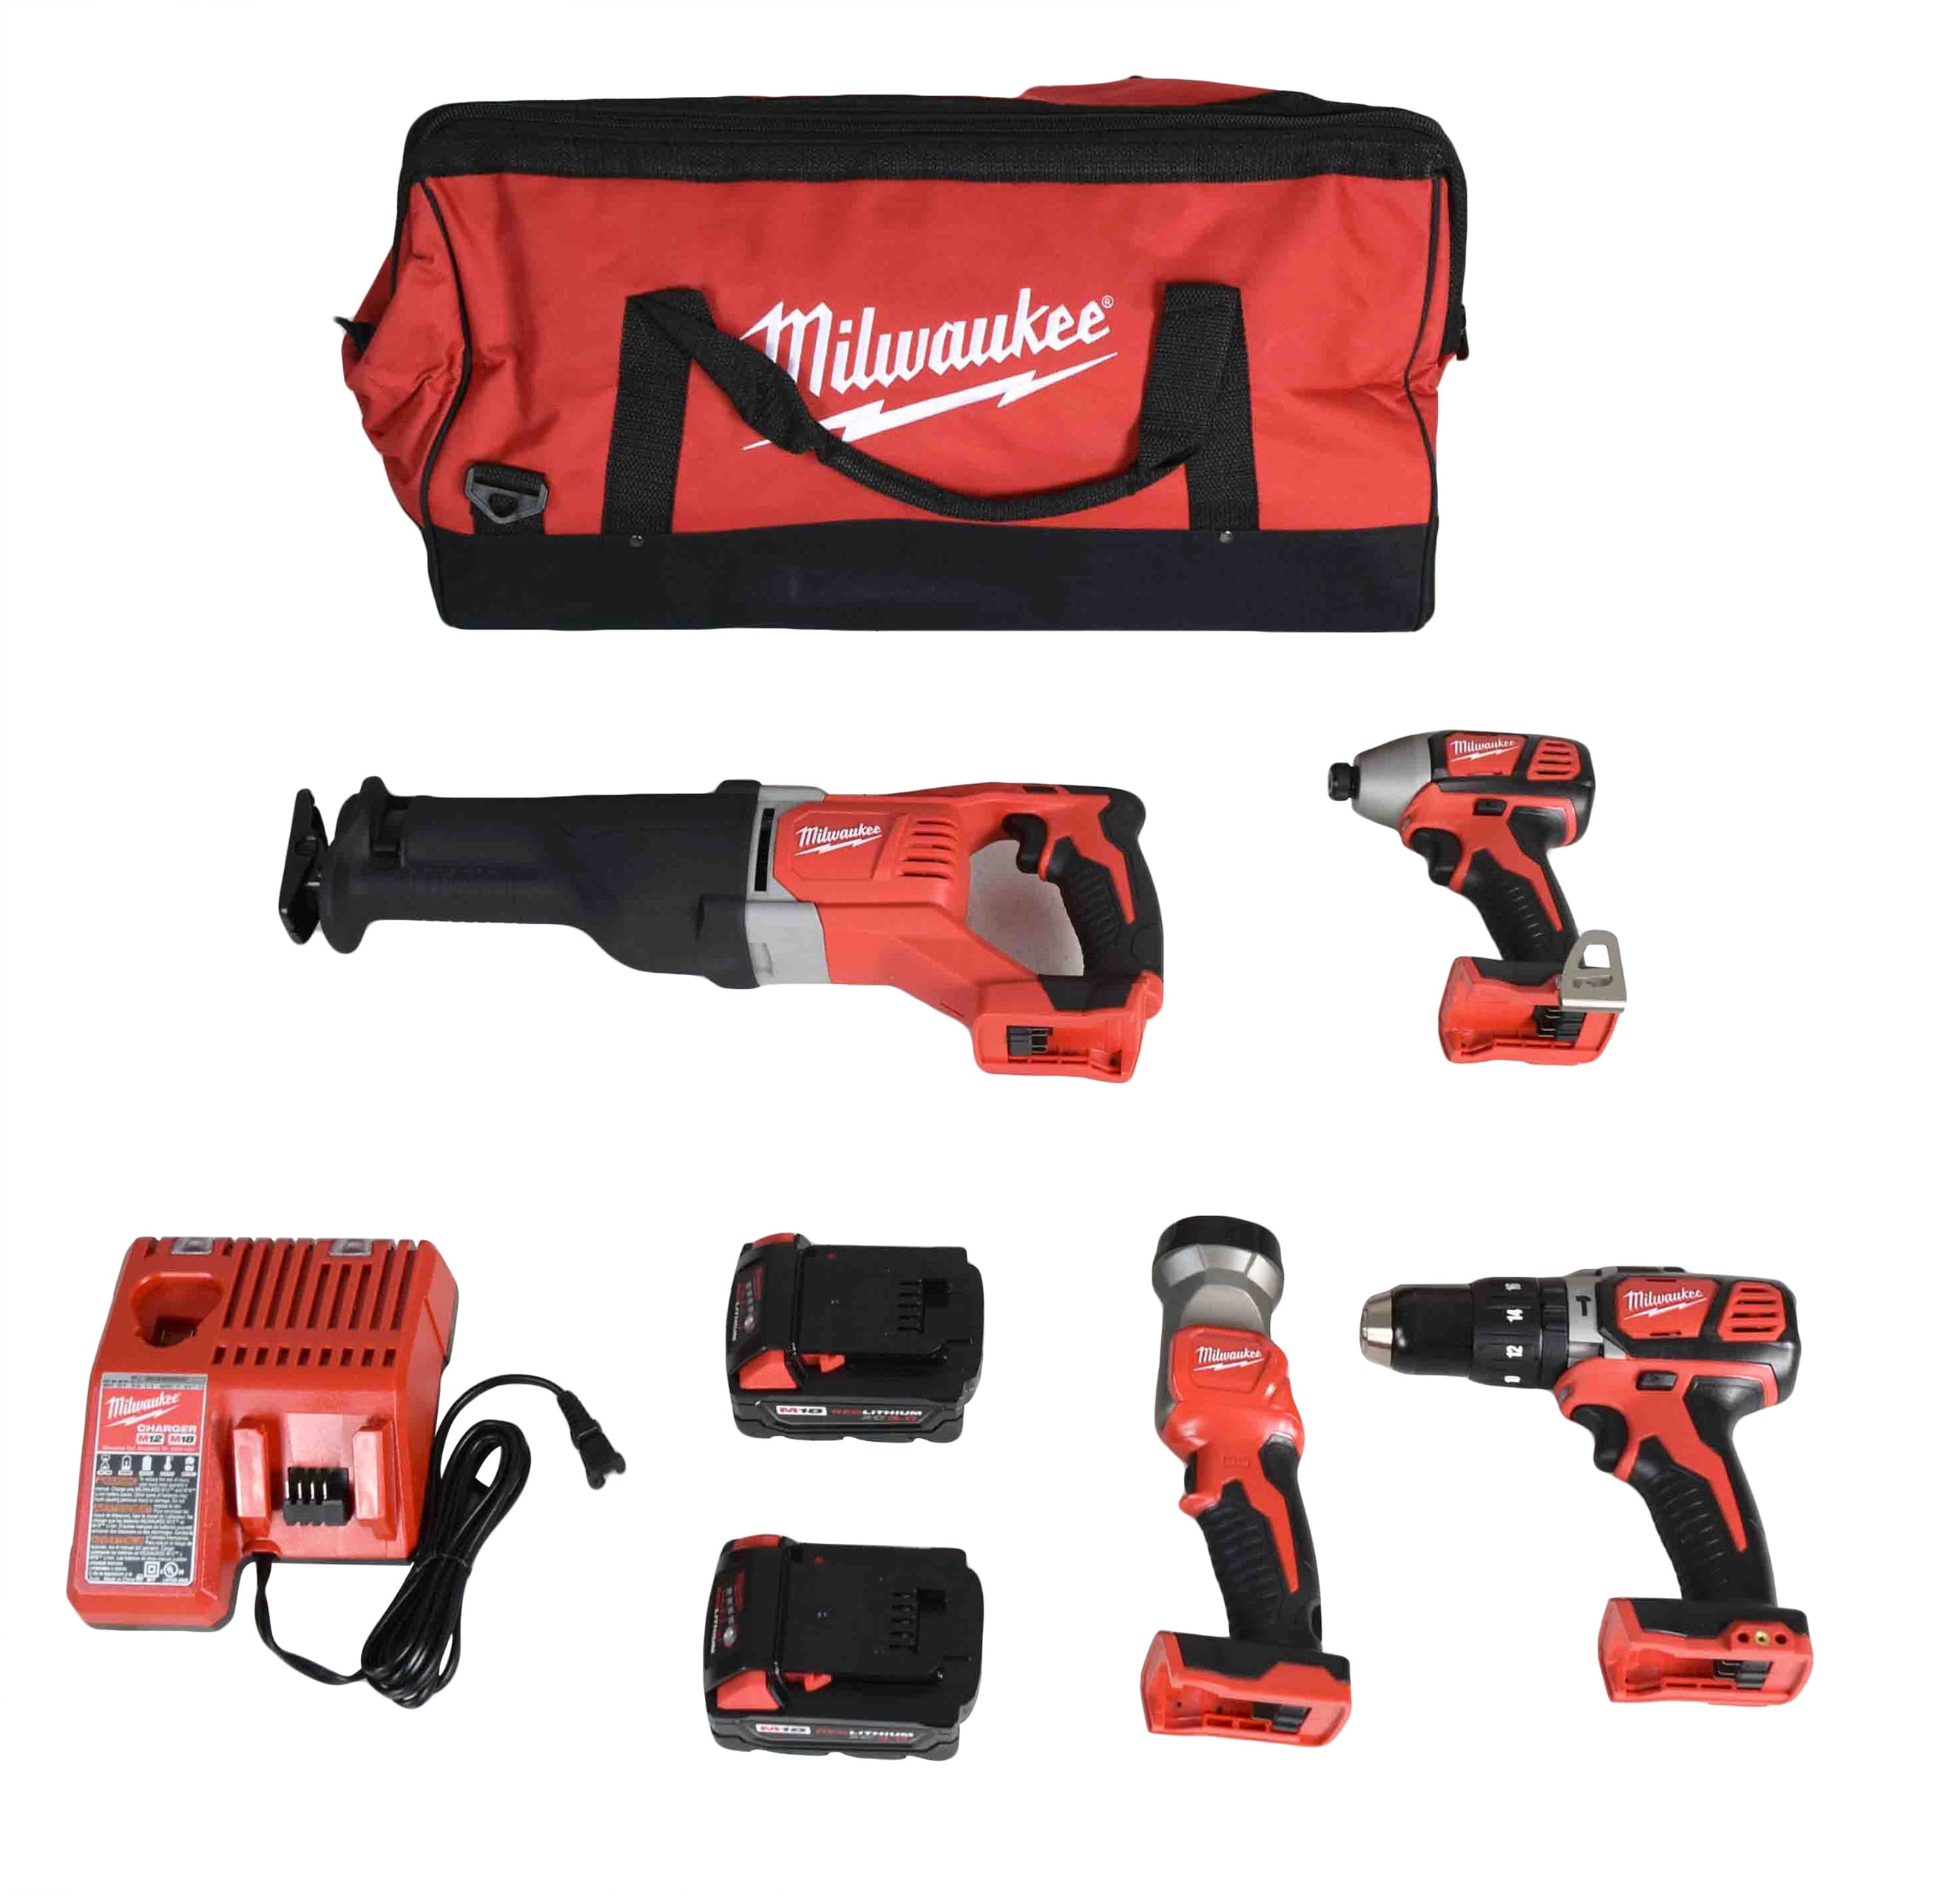 Milwaukee 2606-22CT 18V Lithium-Ion 1/2 inch Cordless Drill Driver Kit for sale online 